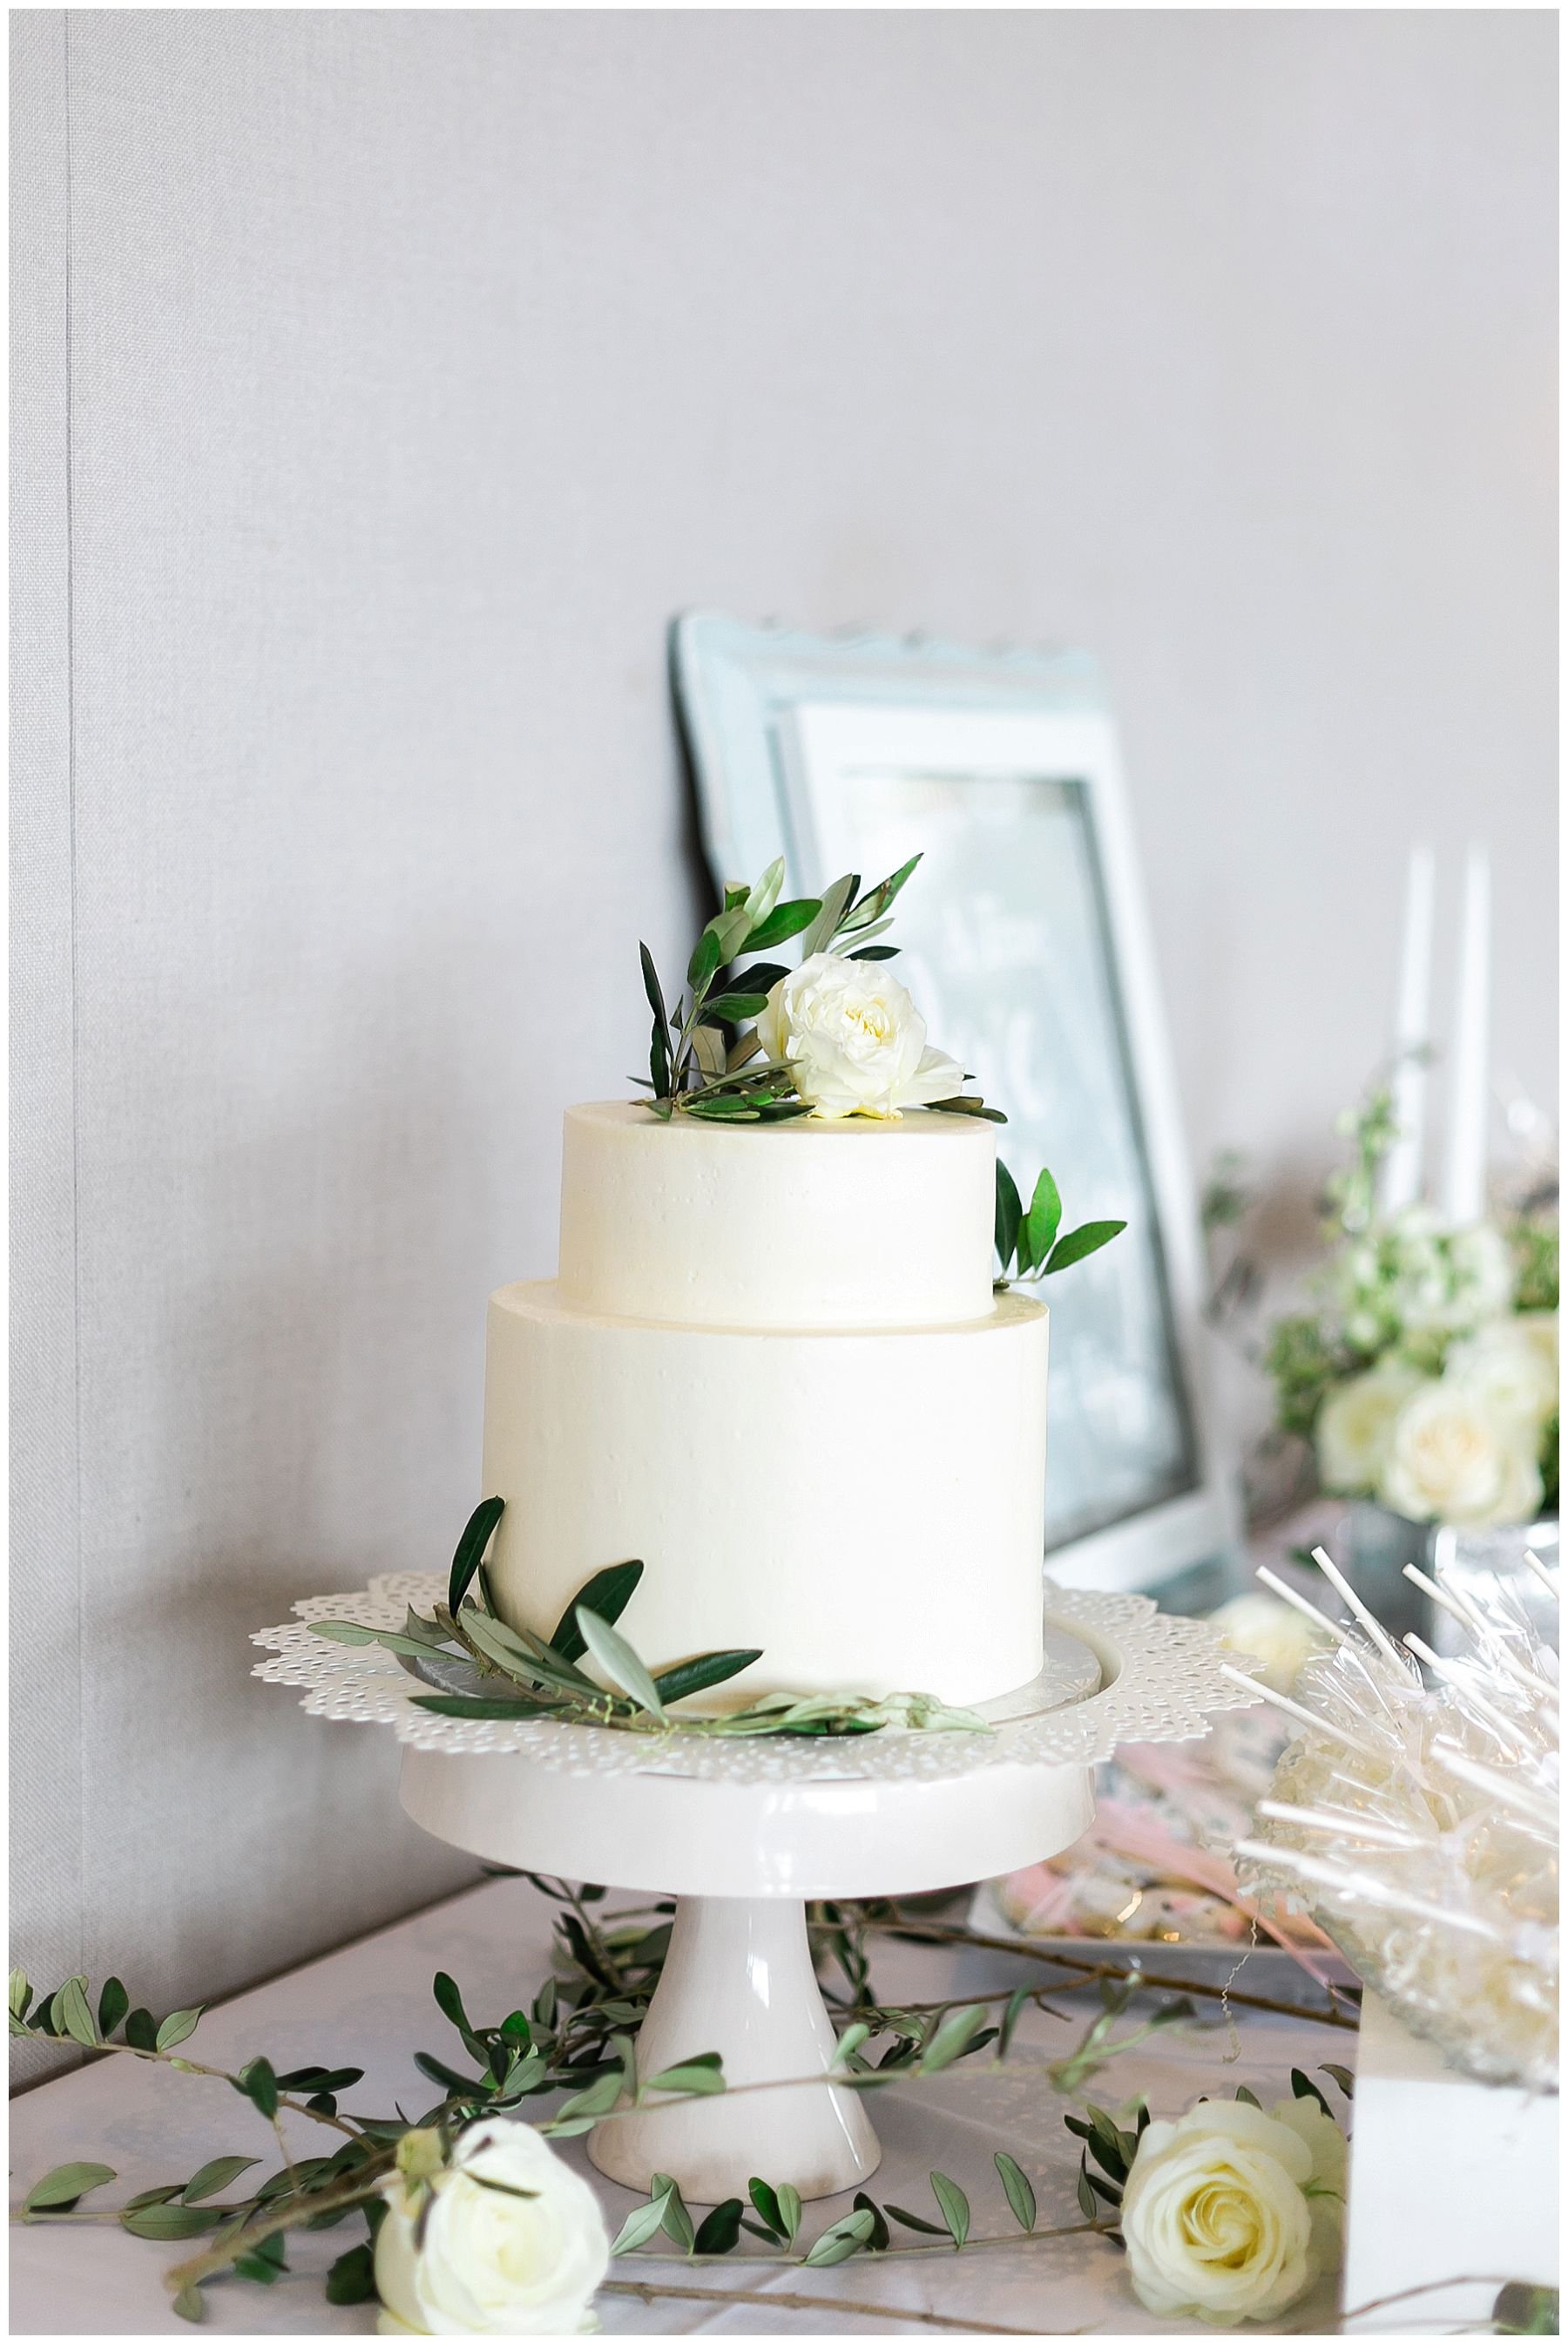 White wedding cake with olive branch and greenery.